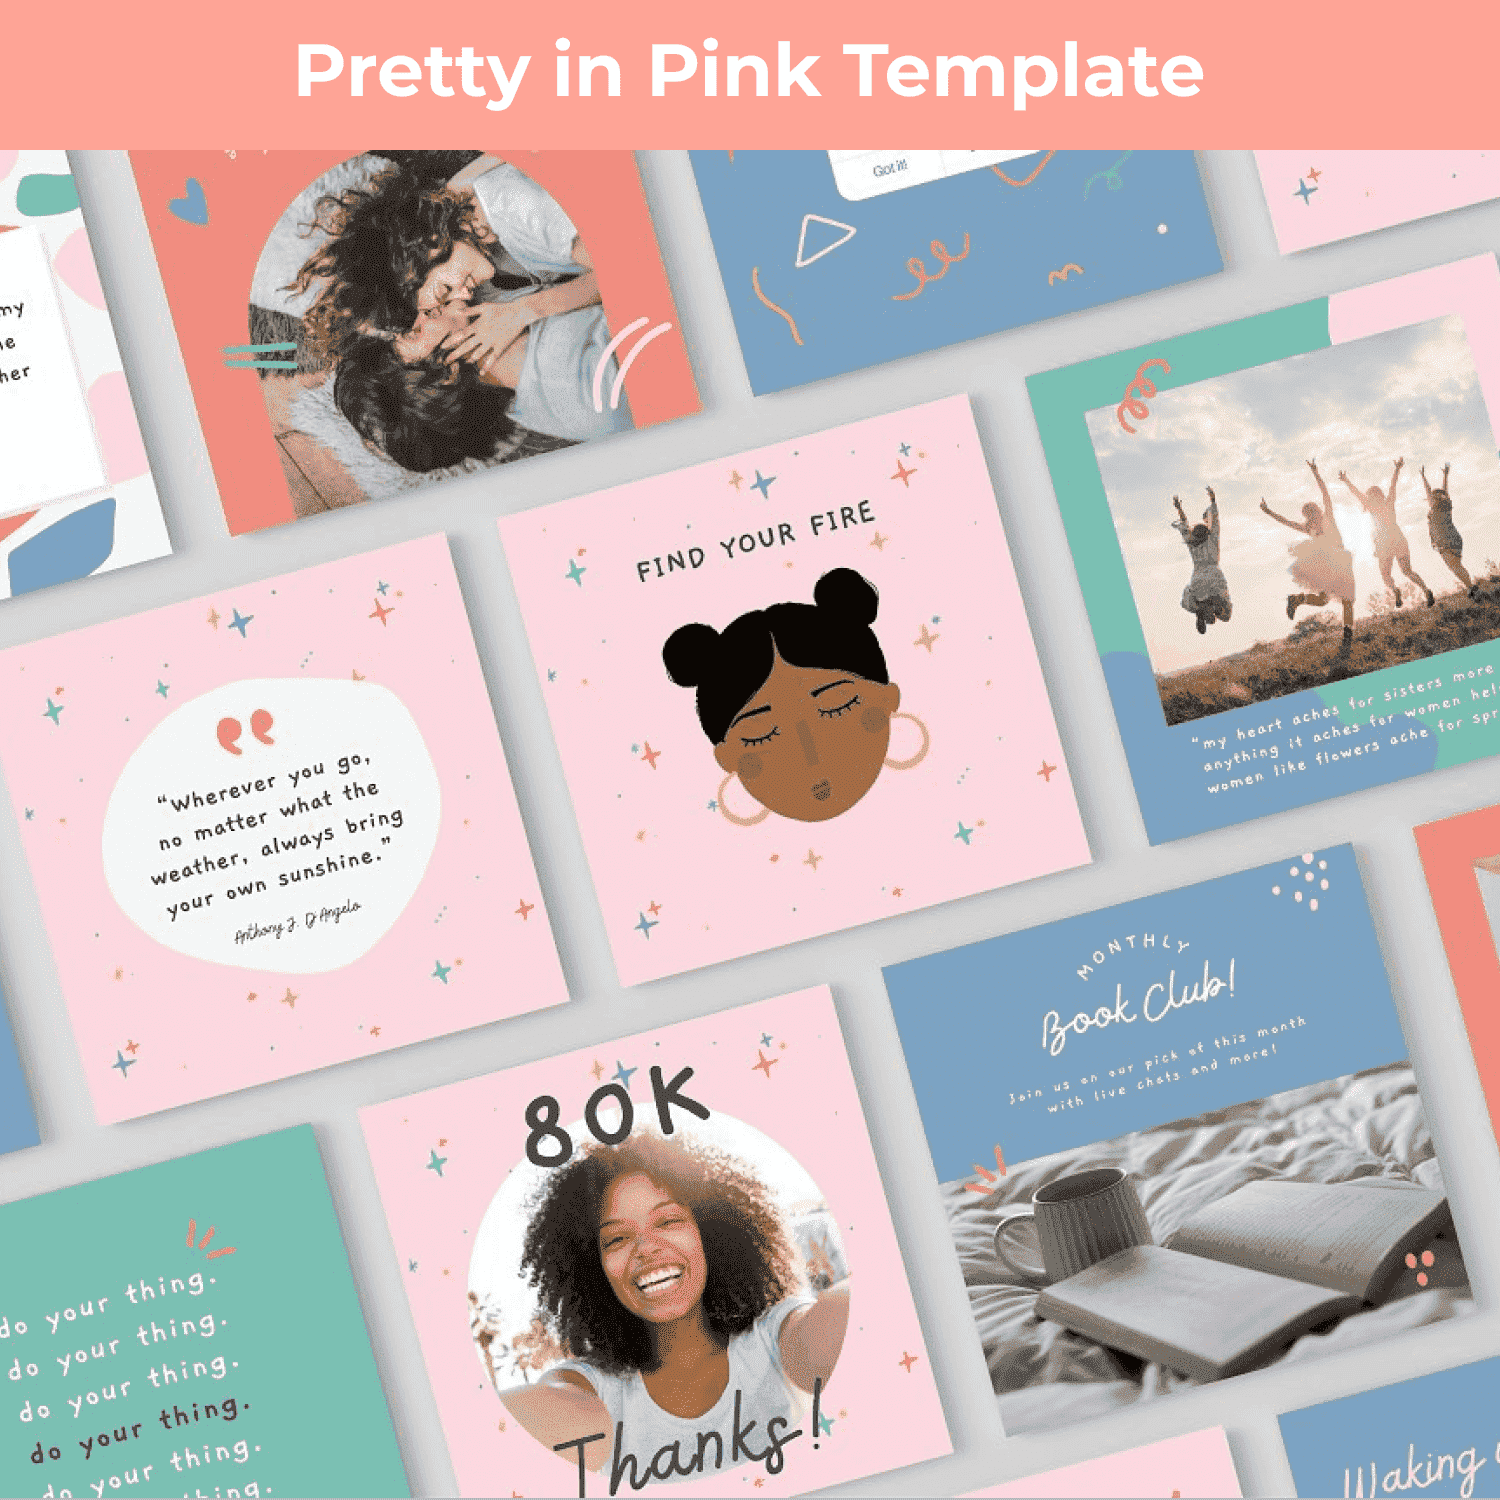 Pretty In Pink Template Preview - "Find Your Fire".